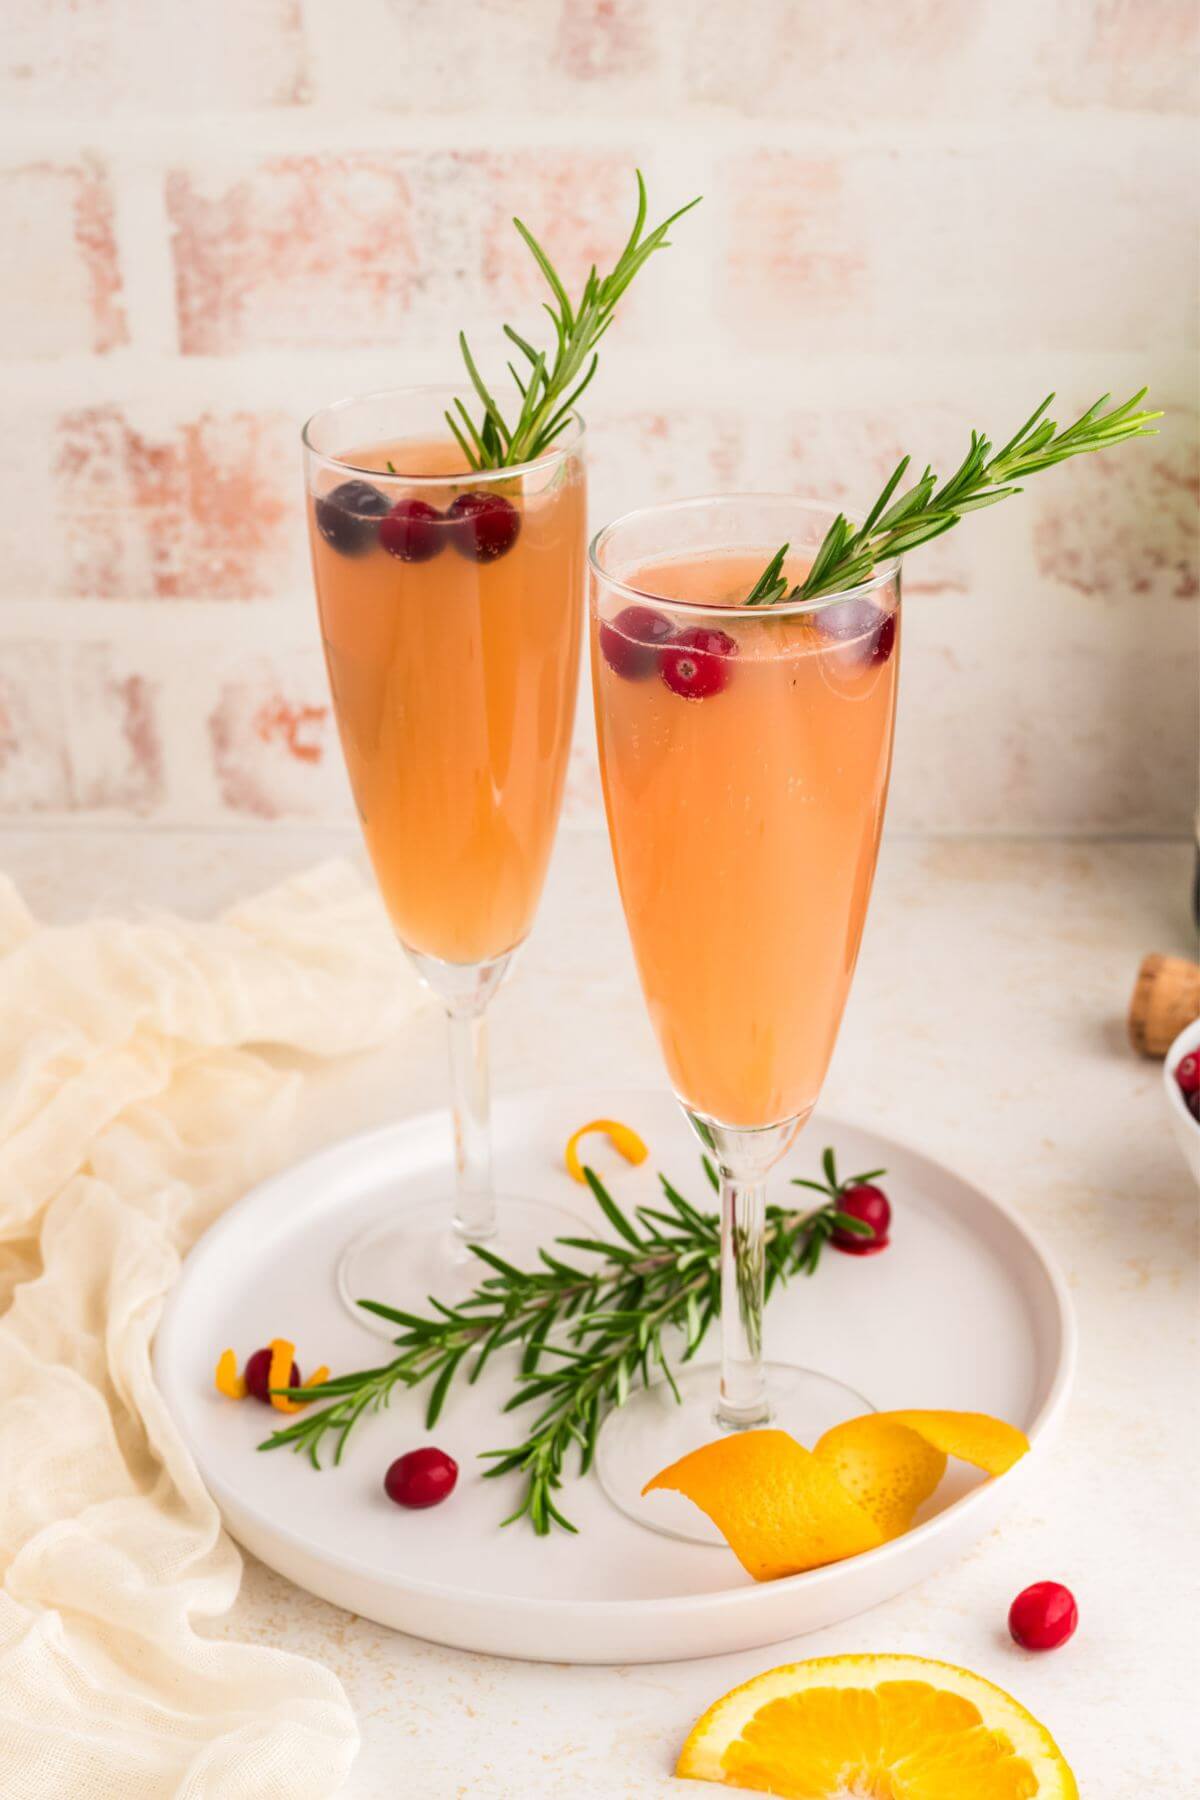 Two flutes of Christmas Mimosa with orange peel, cranberries and rosemary garnishes.